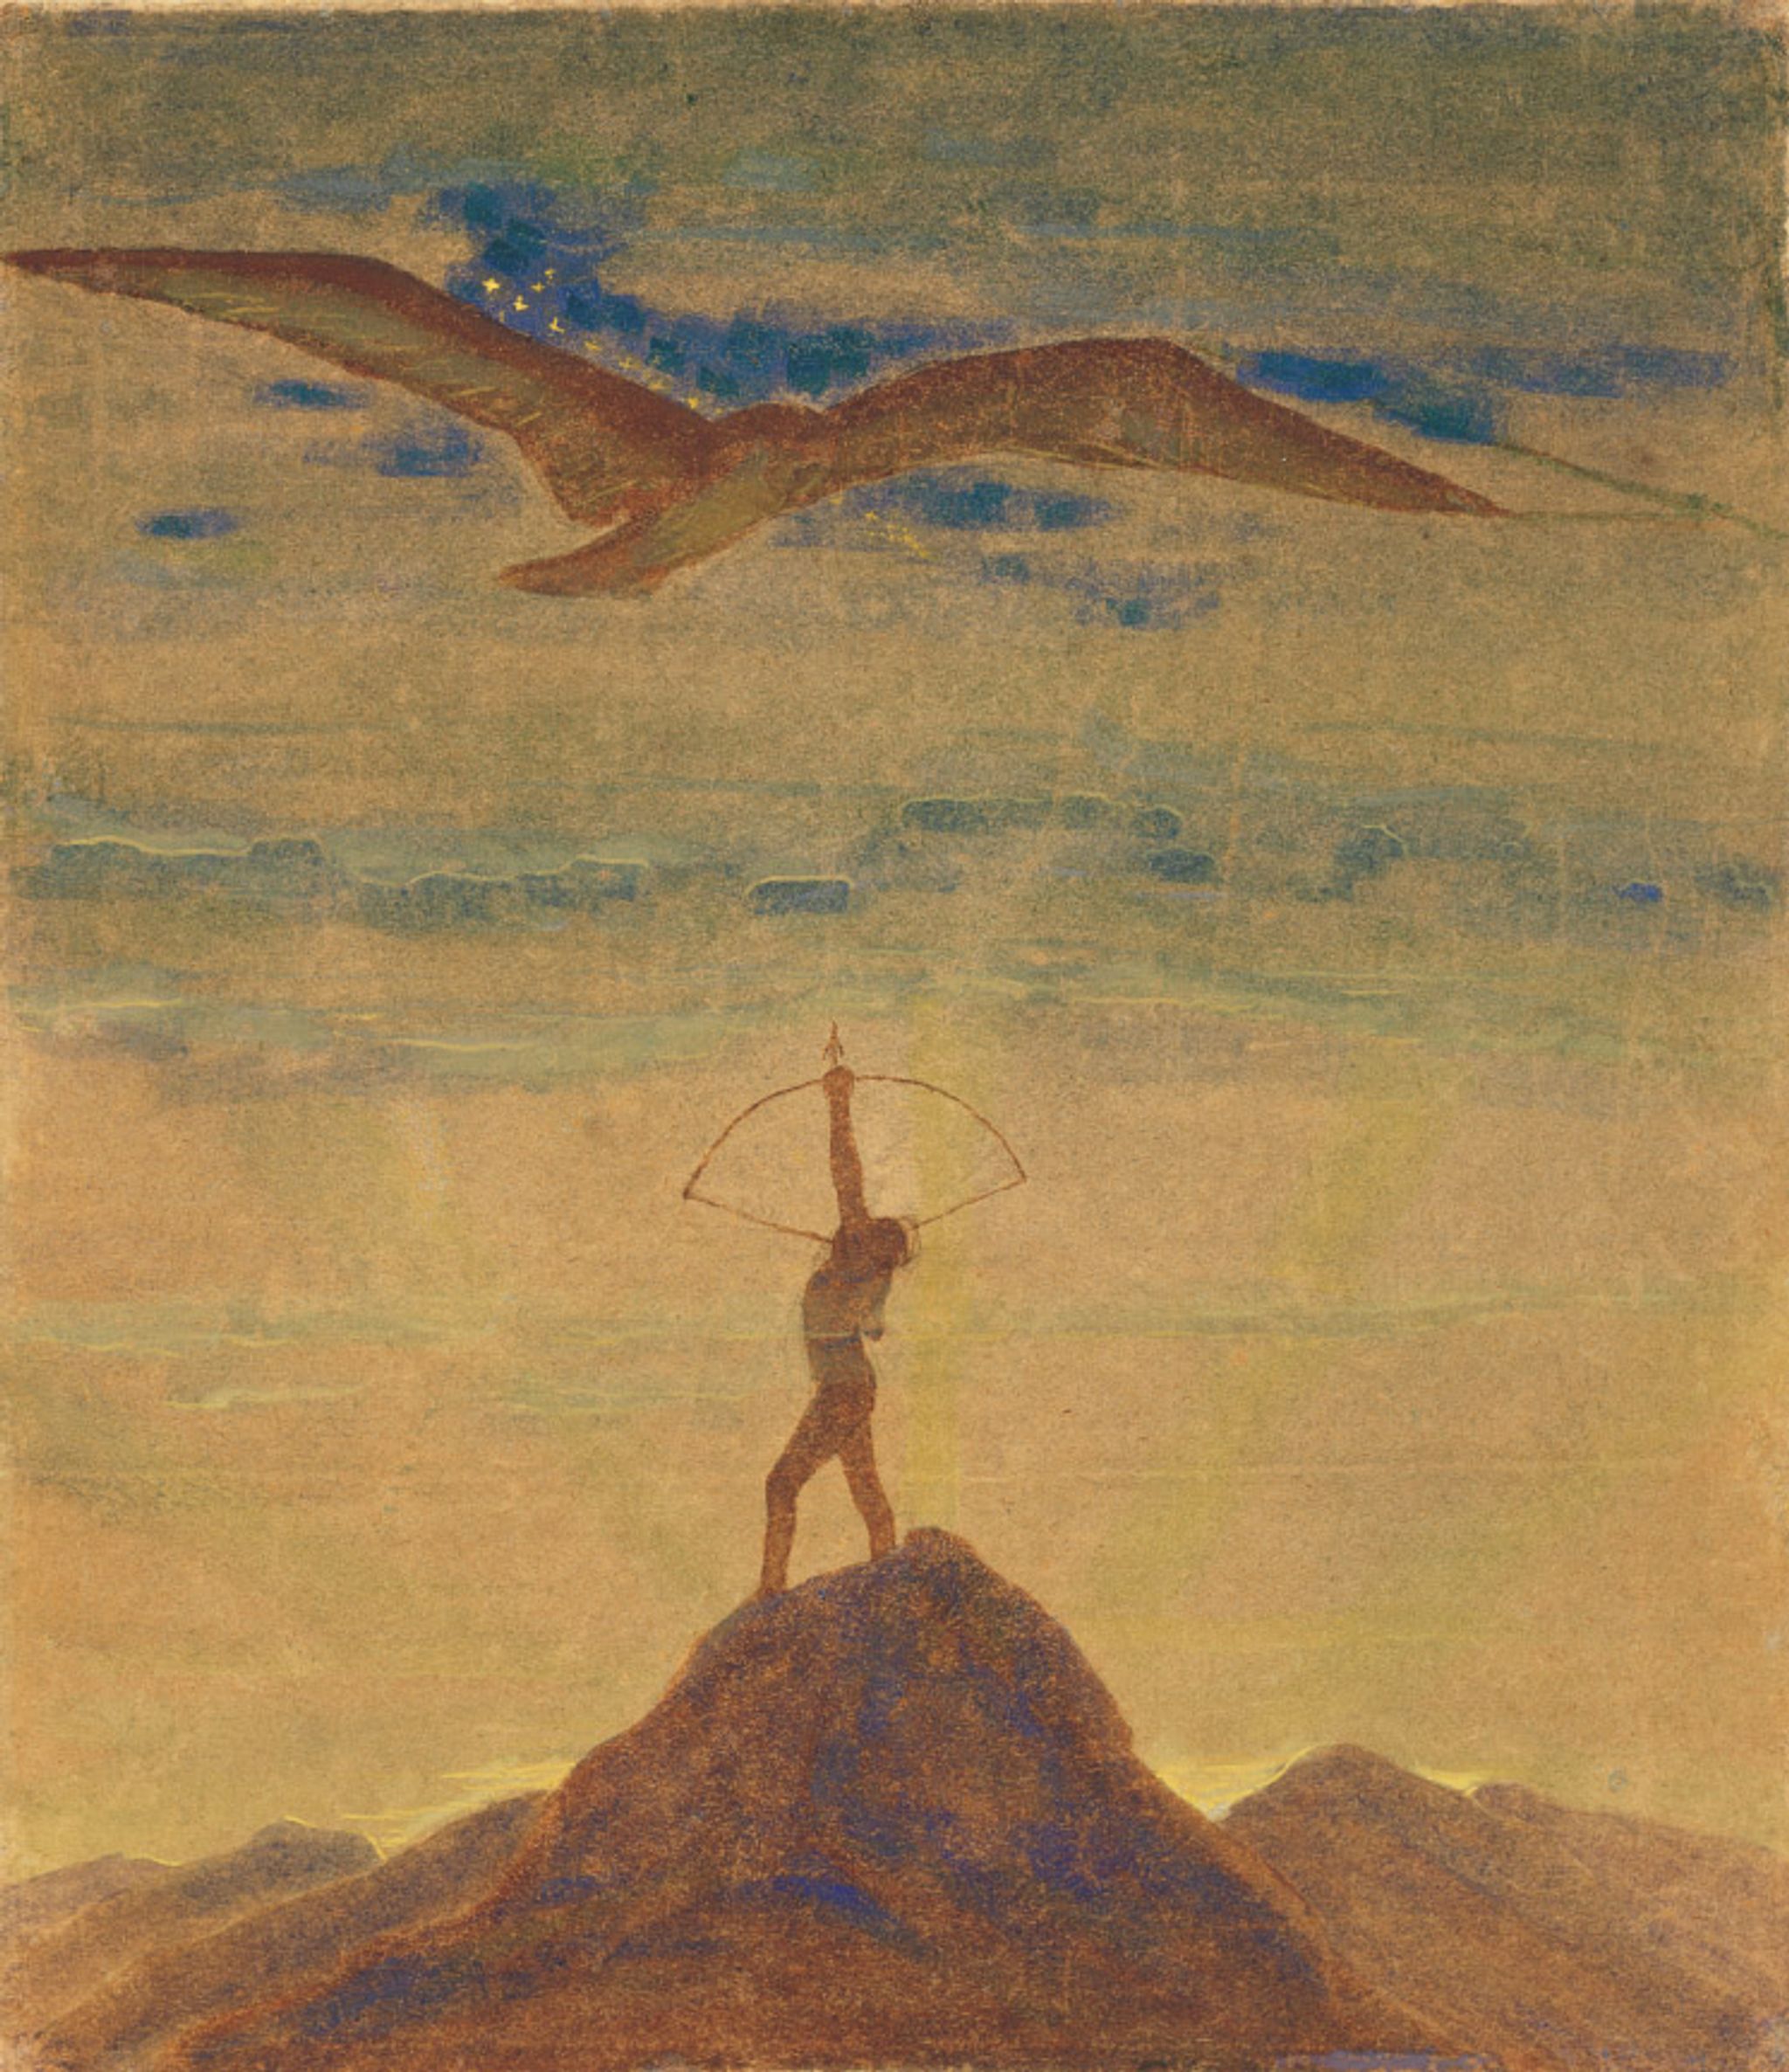 Image for: The Sun is Passing the Sign of Sagittarius. XI from the cycle of 12 paintings “The Zodiac”. 